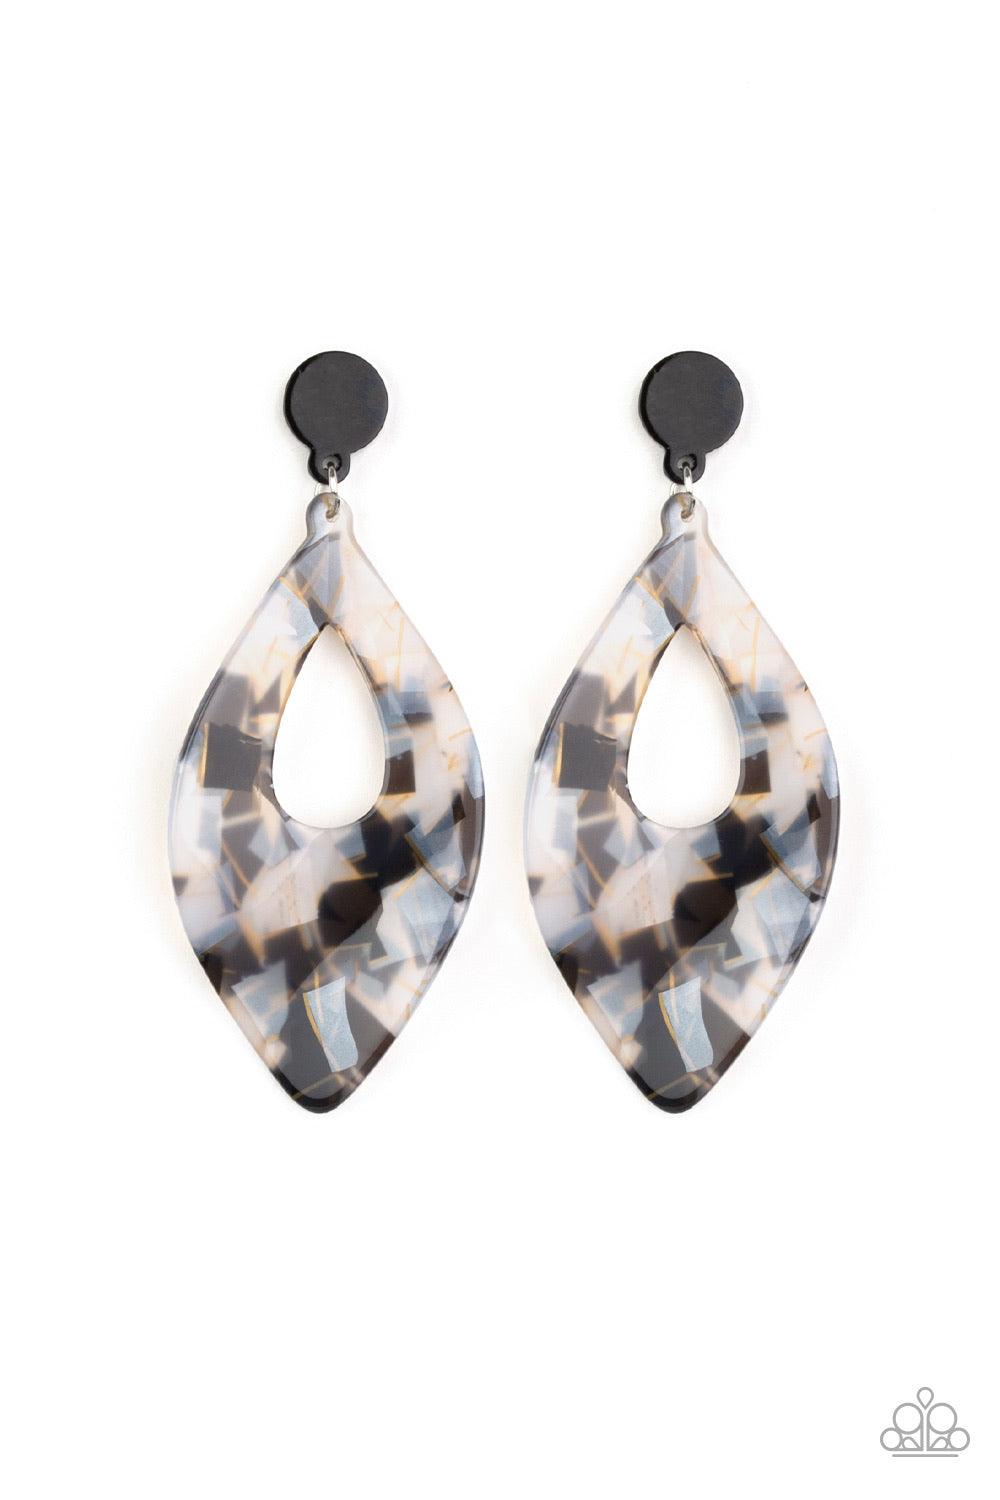 Paparazzi Accessories Metro Retrospect - Black Featuring a shimmery geometric finish, an abstract acrylic lure attaches to a simple black acrylic fitting for a retro inspired look. Earring attaches to a standard post fitting. Jewelry